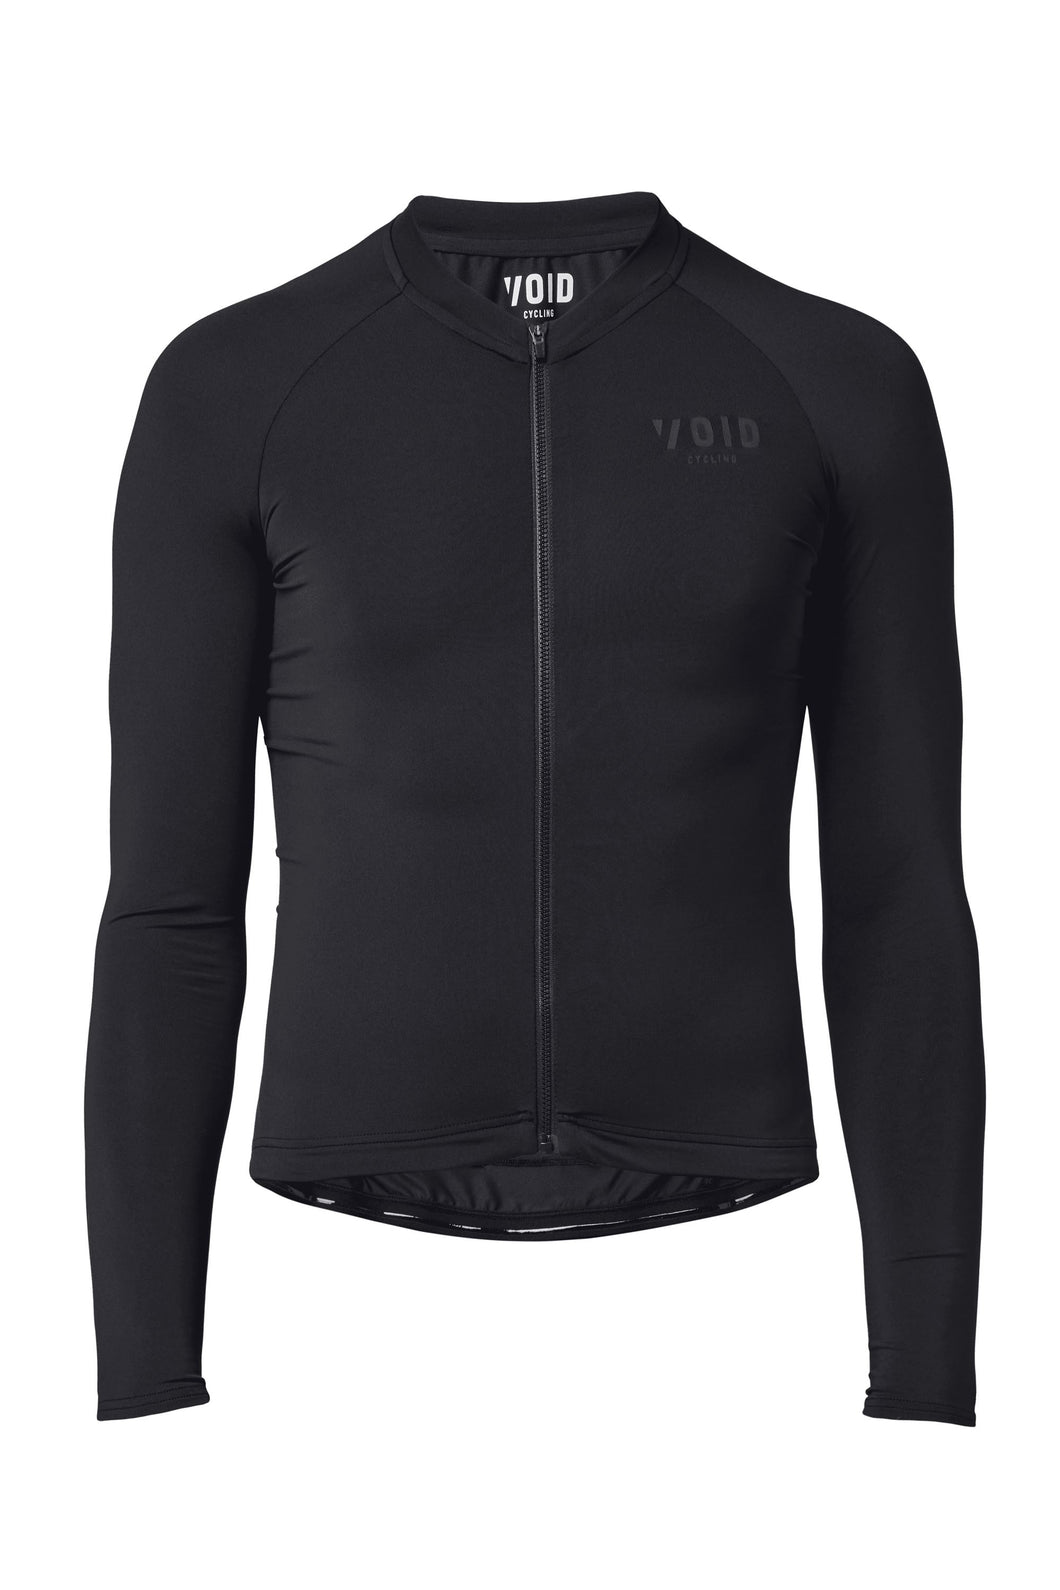 VOID Pure Long Sleeve Jersey - Black